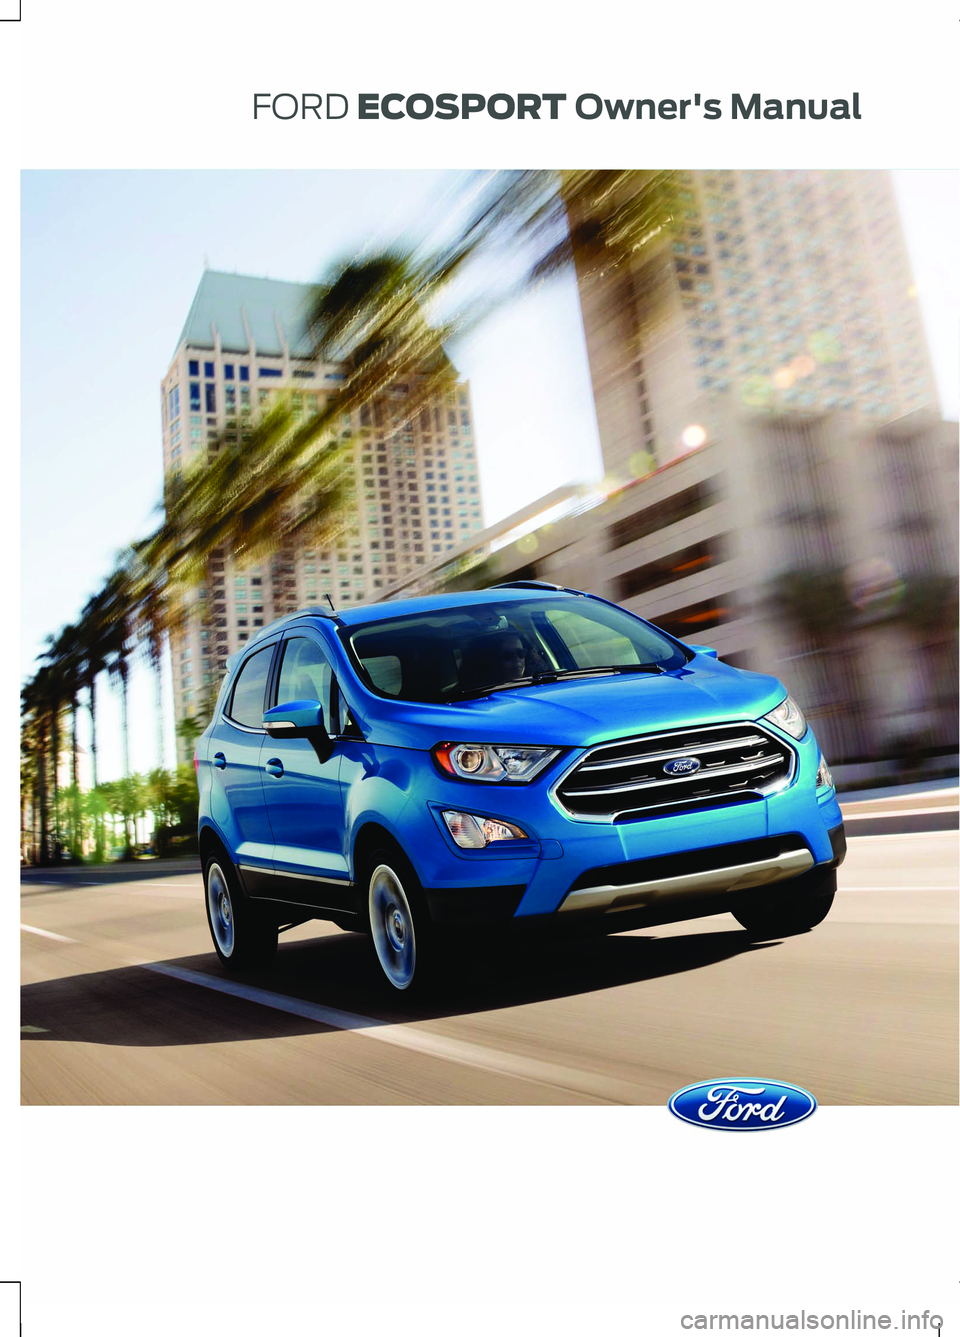 FORD ECOSPORT 2018  Owners Manual FORD ECOSPORTOwner's Manual 